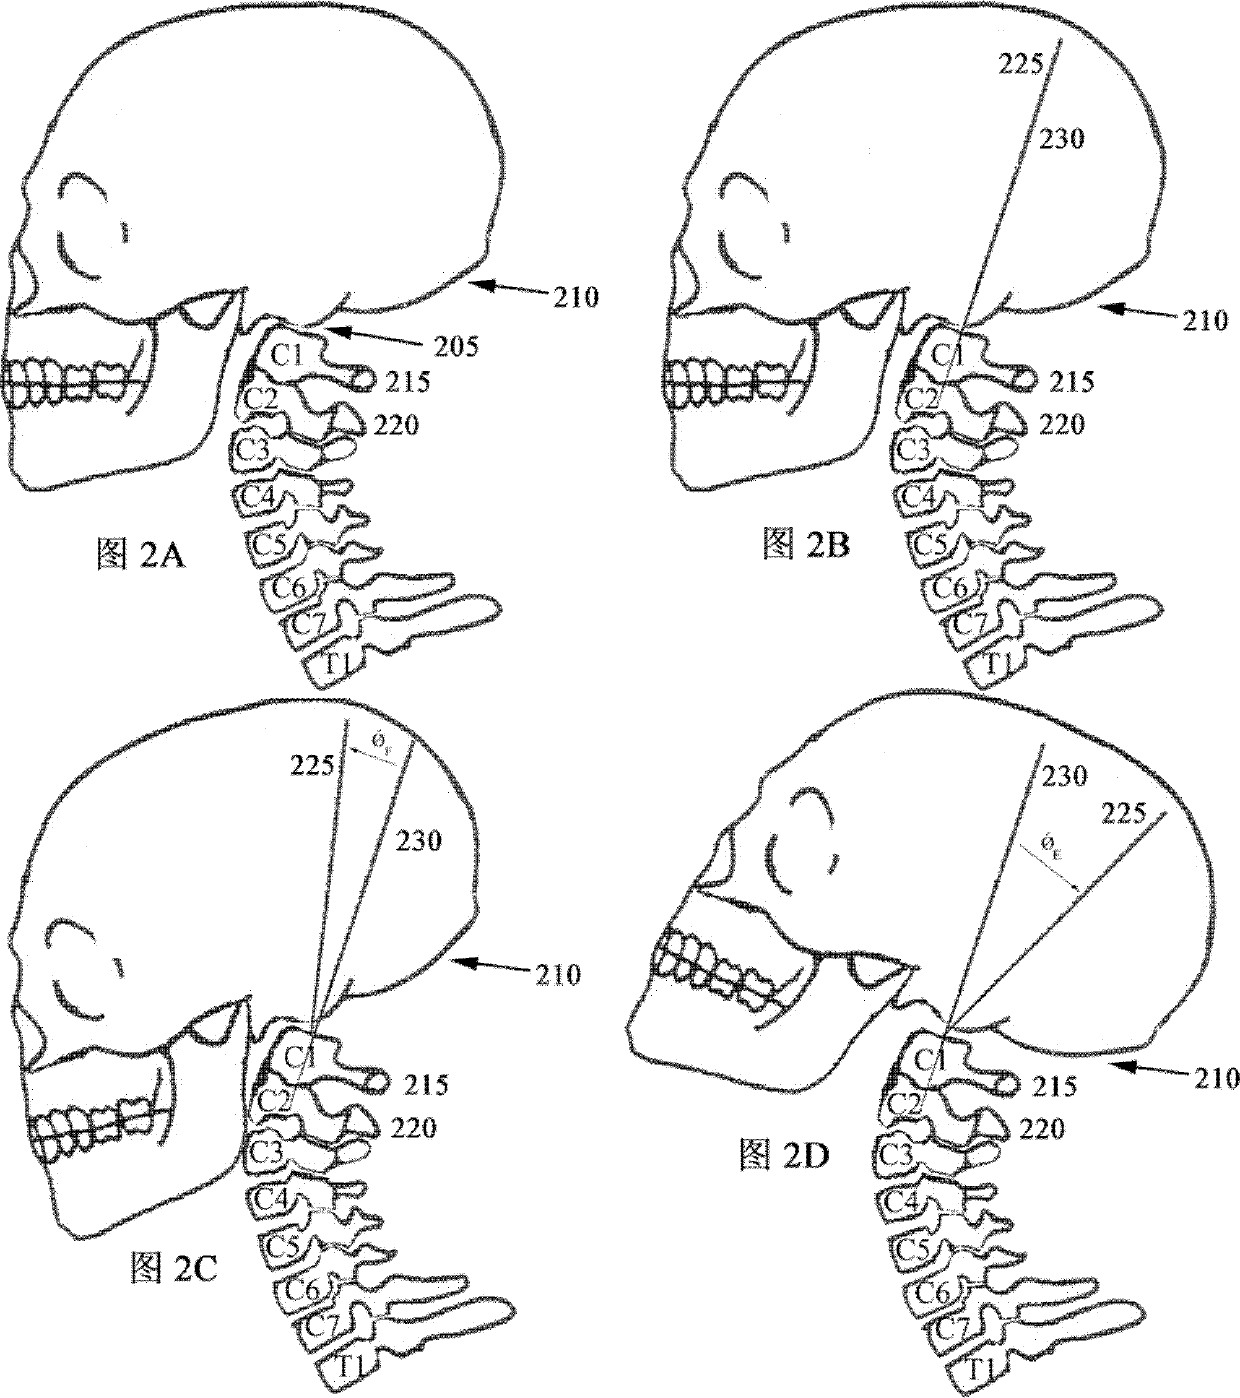 Patient interface equipment and method for aligning adjacent cervical vertebras by aid of same